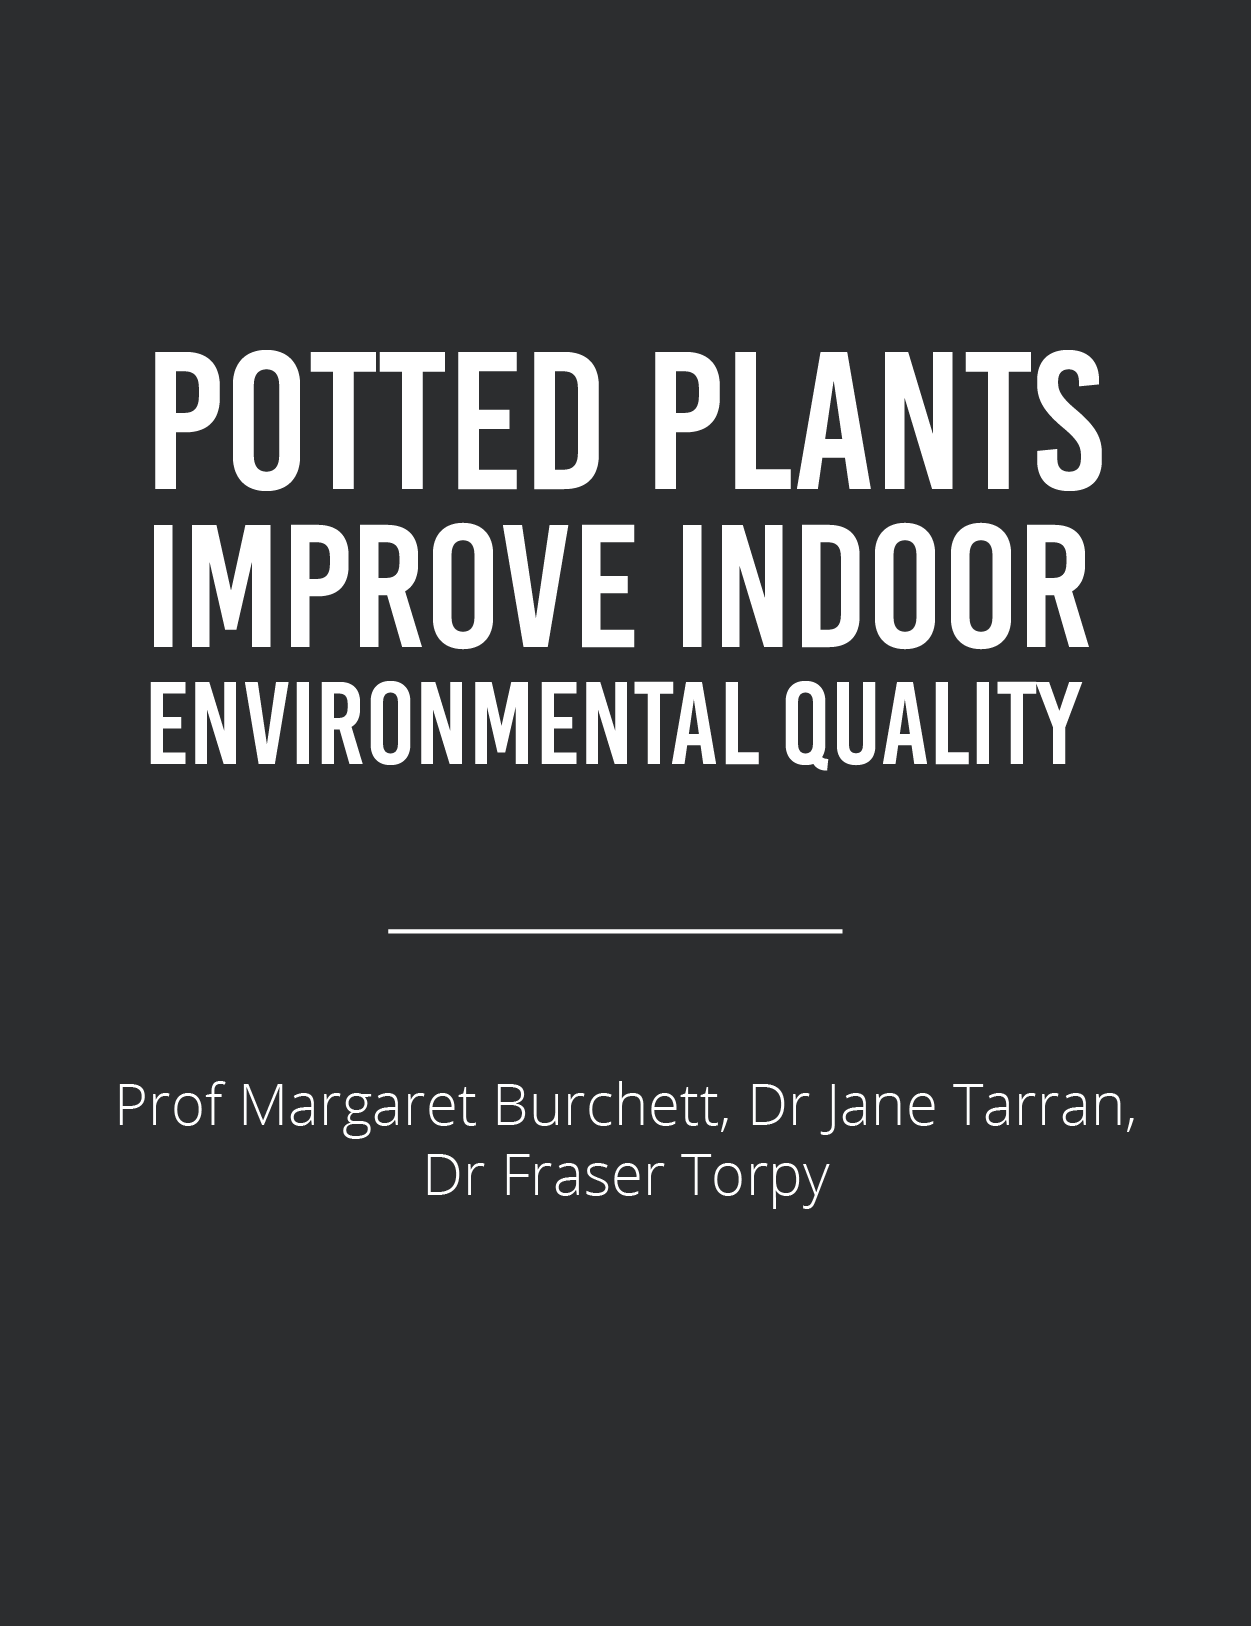 Potted Plants Improve Indoor Environmental QualityFeatured Image